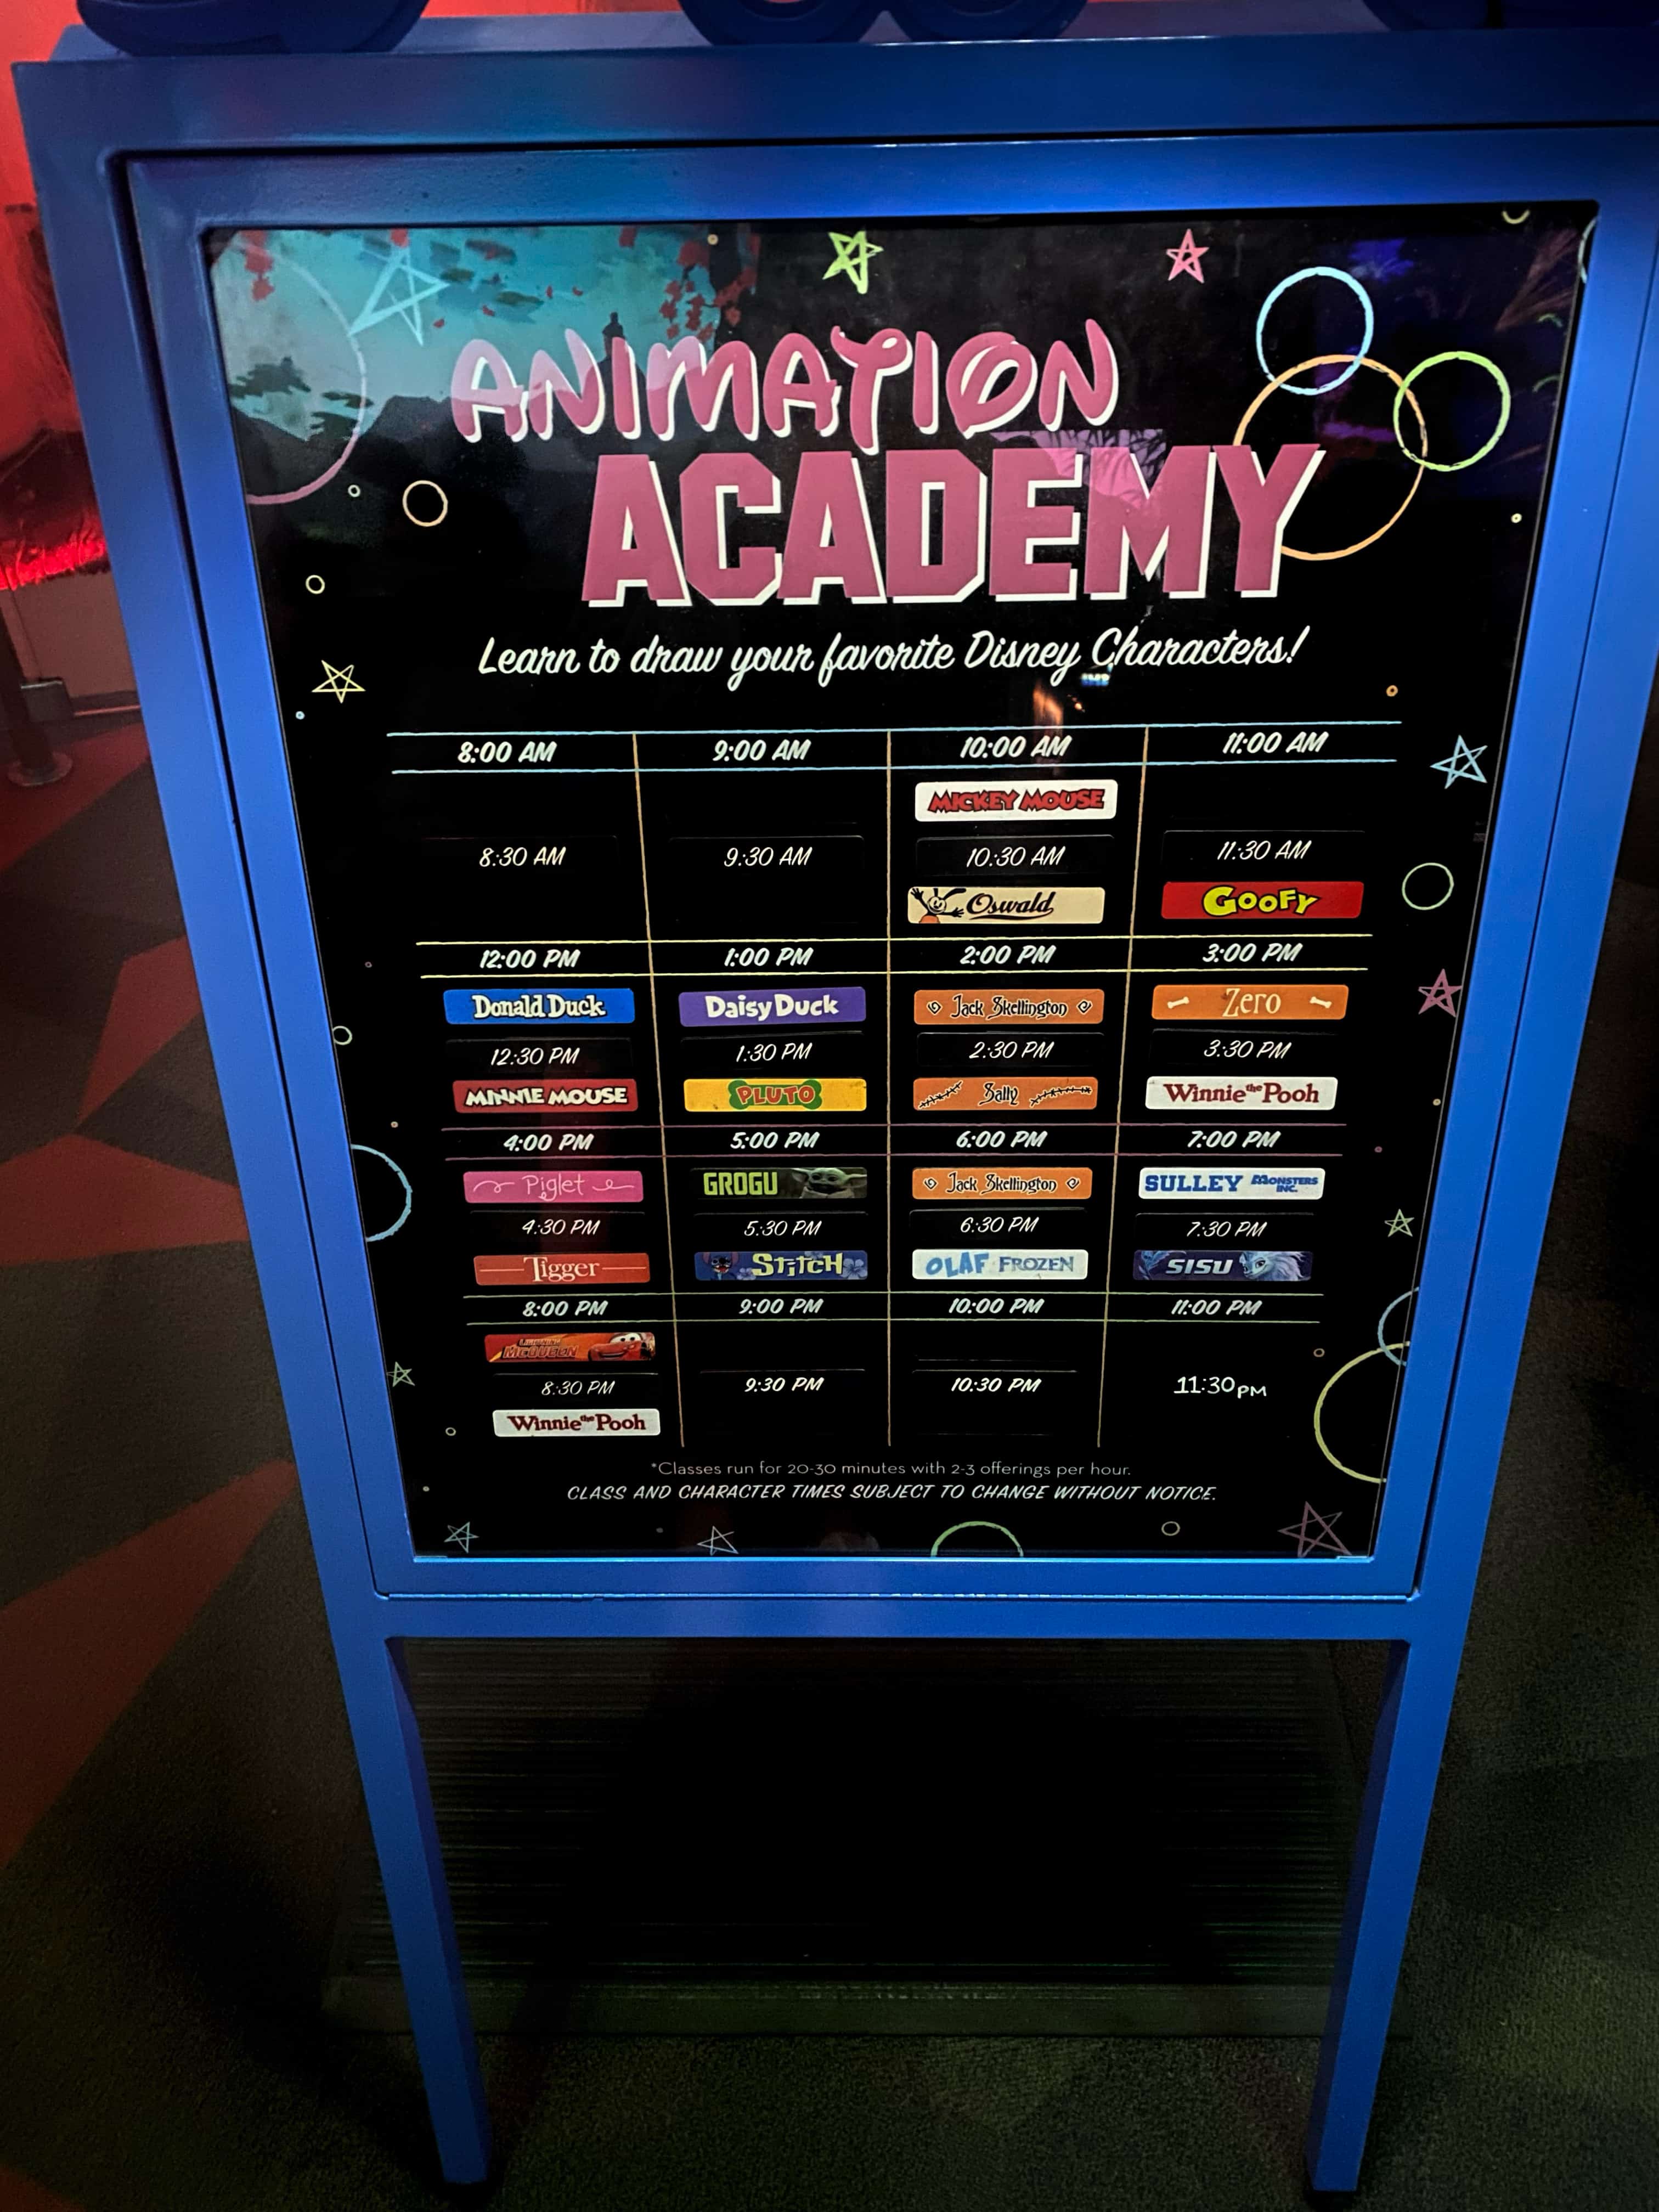 Today s Schedule at the Animation Academy